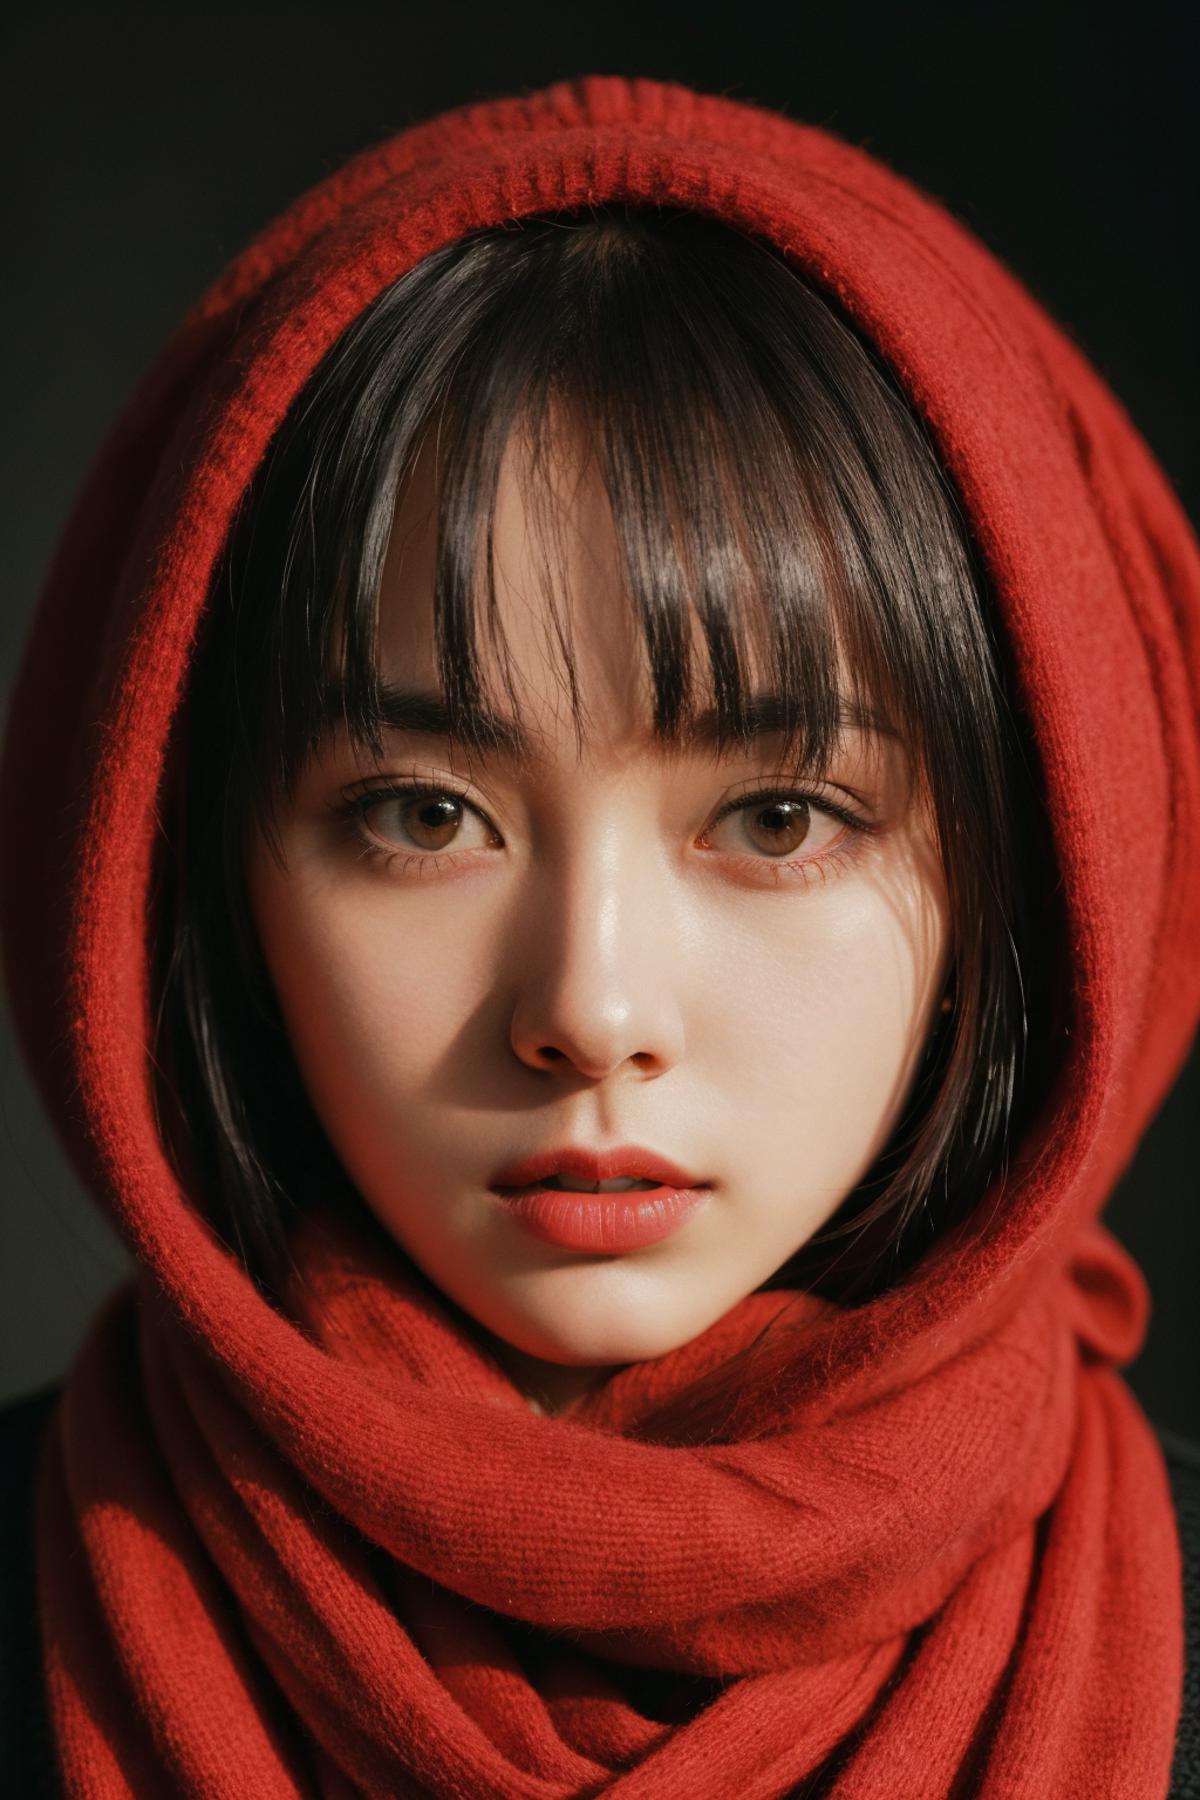 A young woman wearing a red scarf and a red hood with a close up of her face.